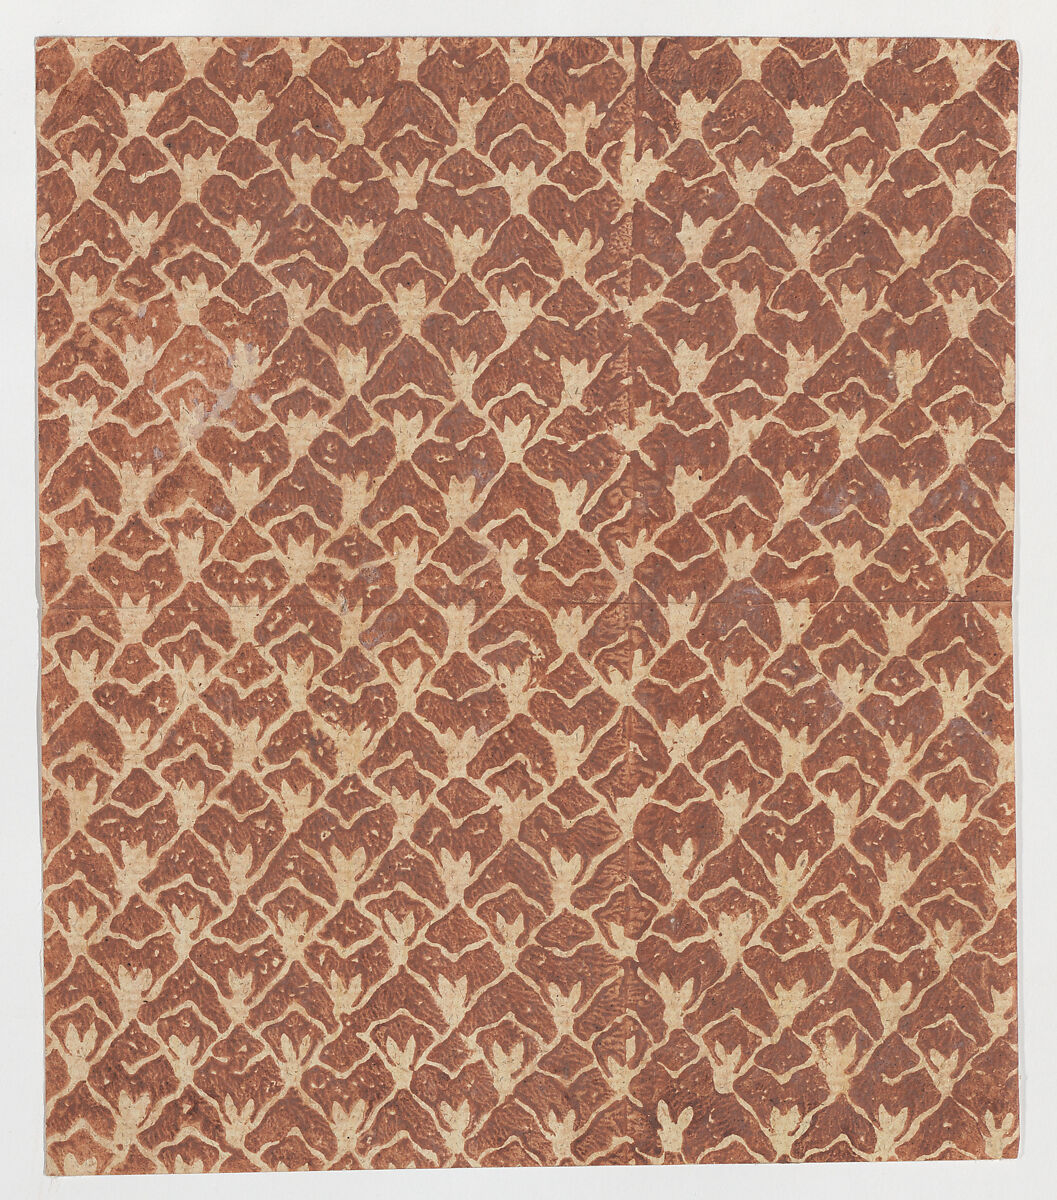 Sheet with overall abstract pattern, Anonymous  , 19th century, Relief print (wood or metal) 